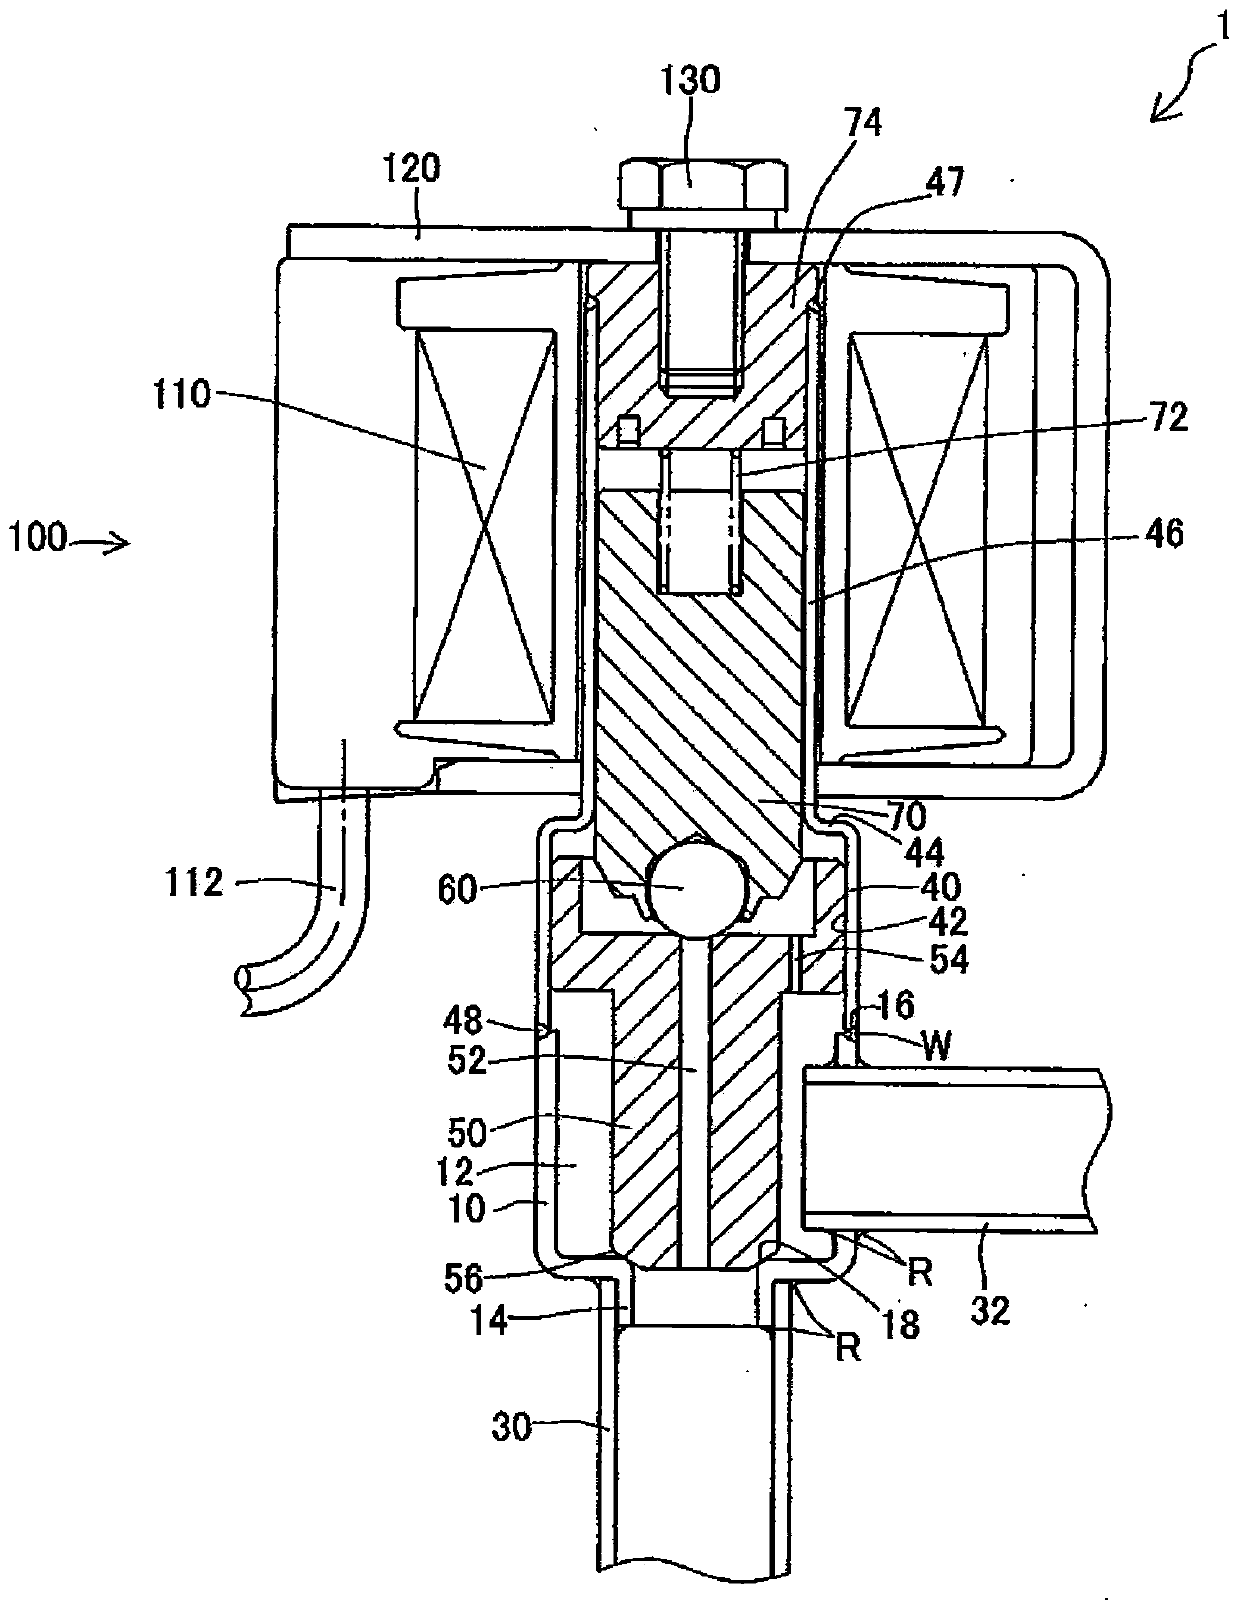 Electric driving valve